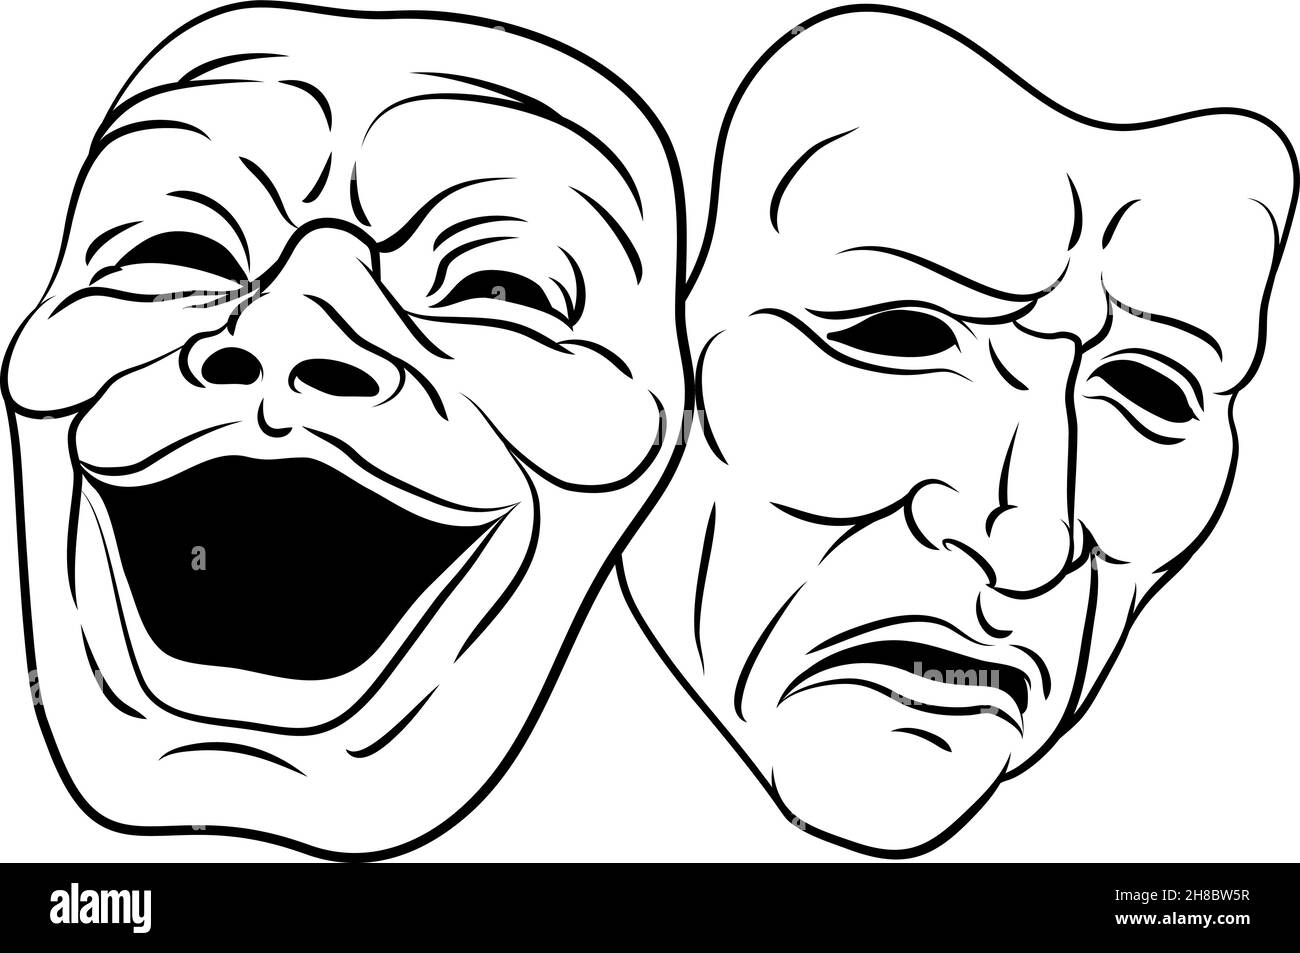 Theater Or Theatre Drama Comedy And Tragedy Masks Stock Vector